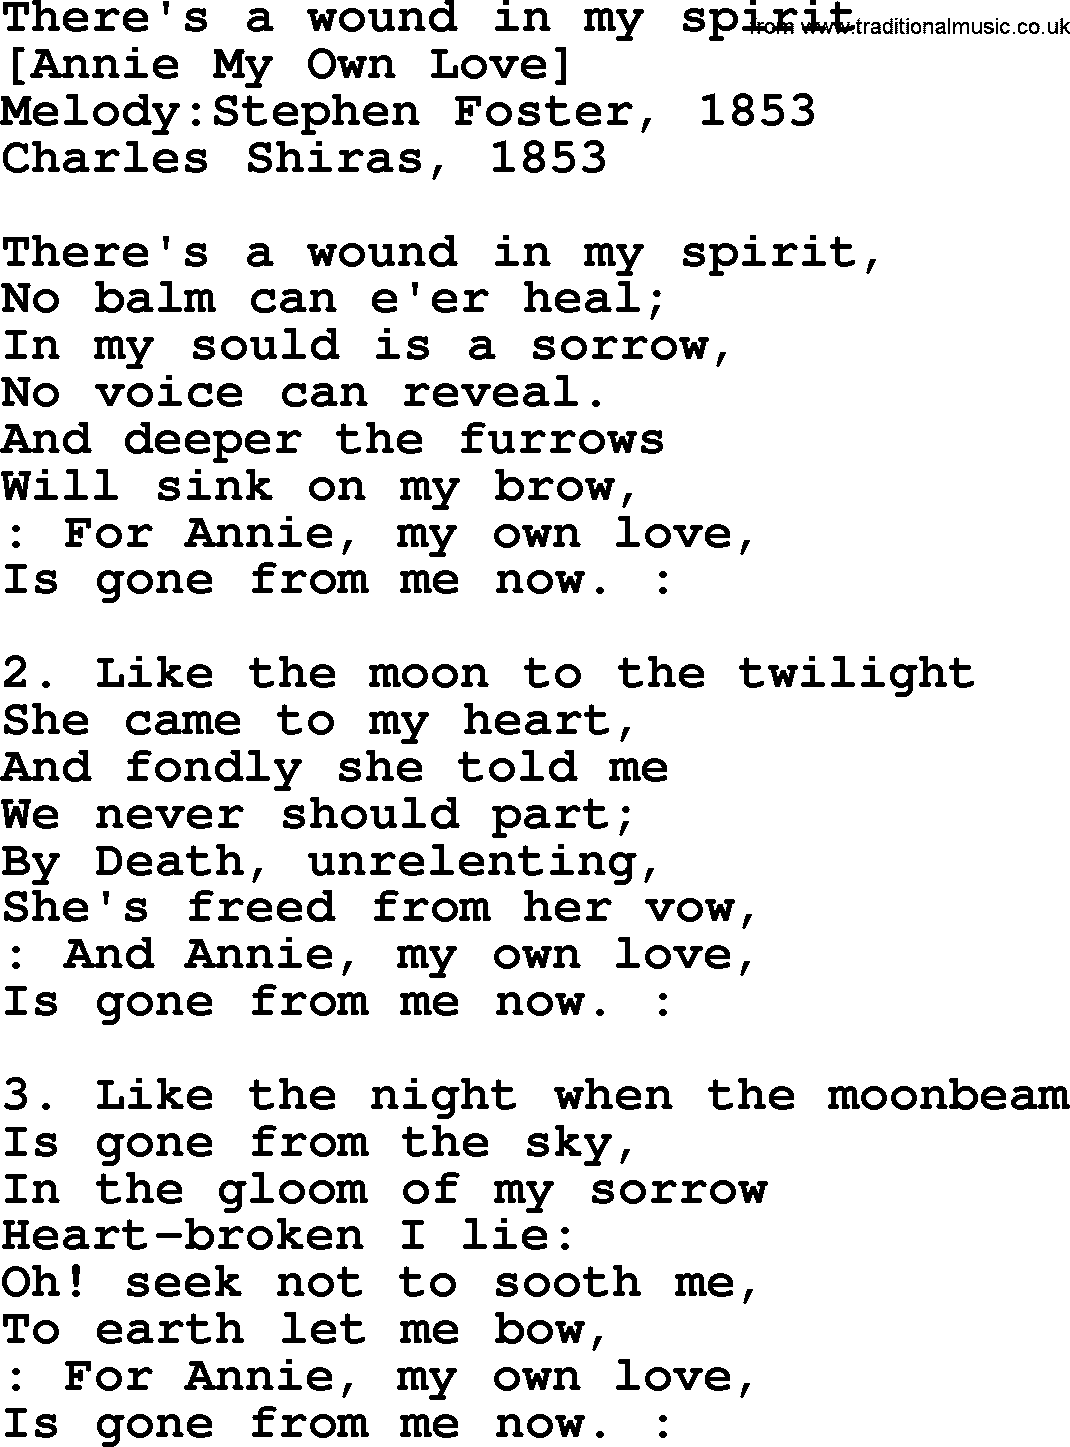 Old American Song: There's A Wound In My Spirit, lyrics